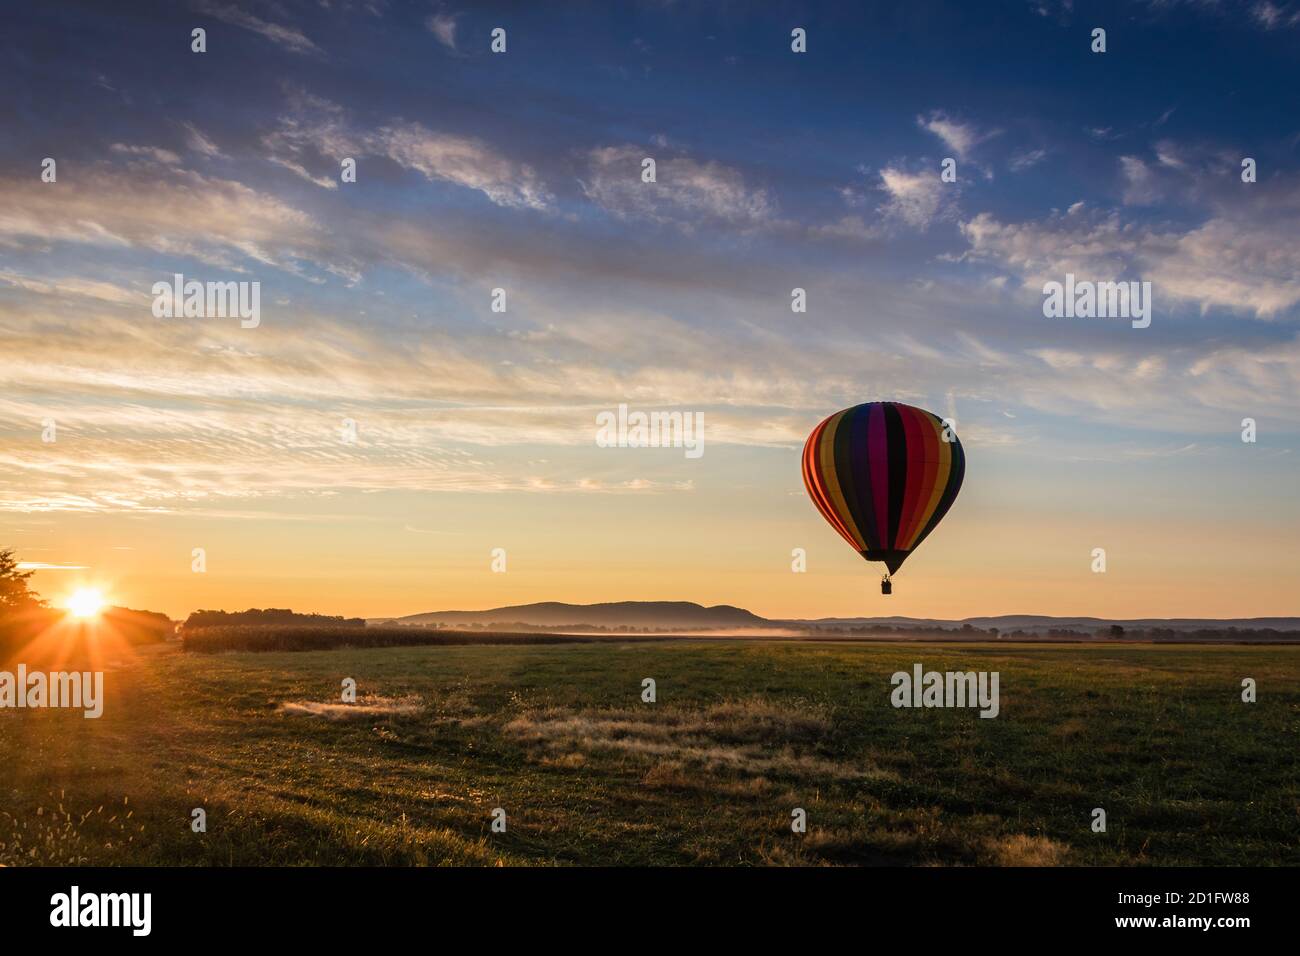 Hot Air Balloon in colorful rainbow stripes begins ascent over farm field as sun rises blue cloudy sky Stock Photo